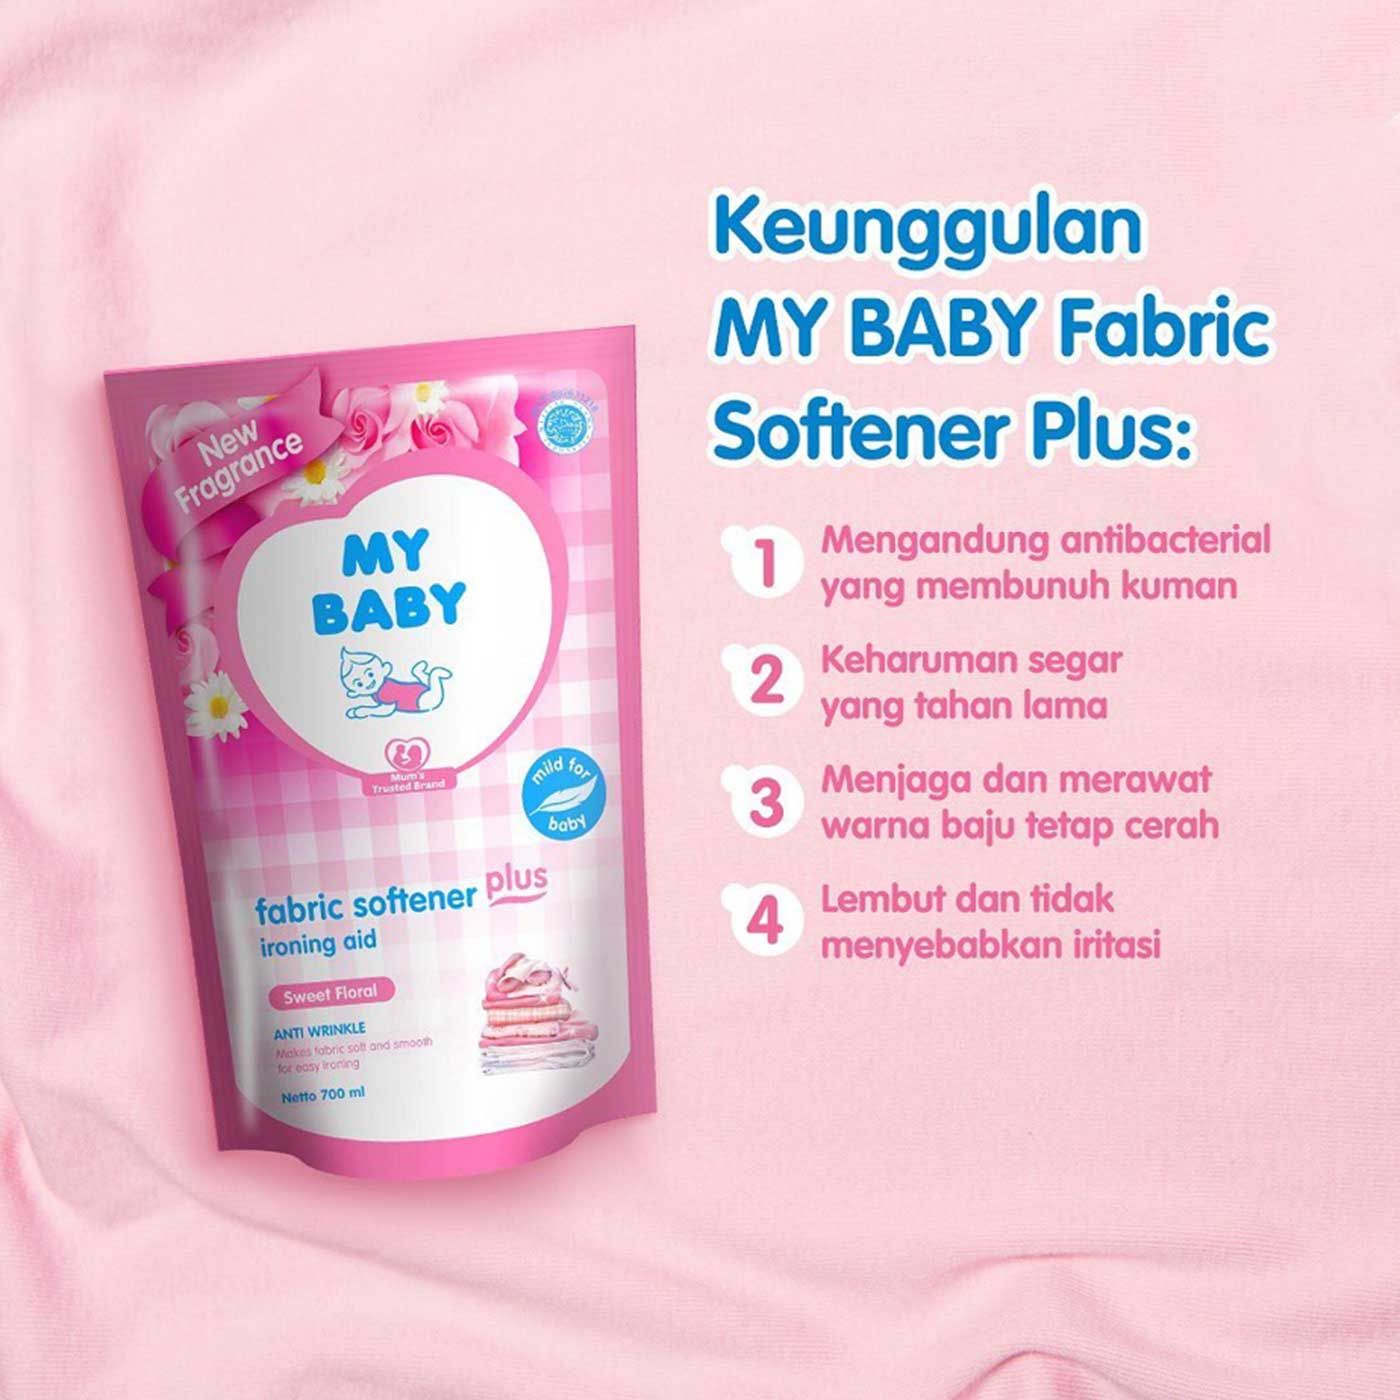 My Baby fabric Softener Plus Ironing Aid Sweet Floral 1500ml - 4